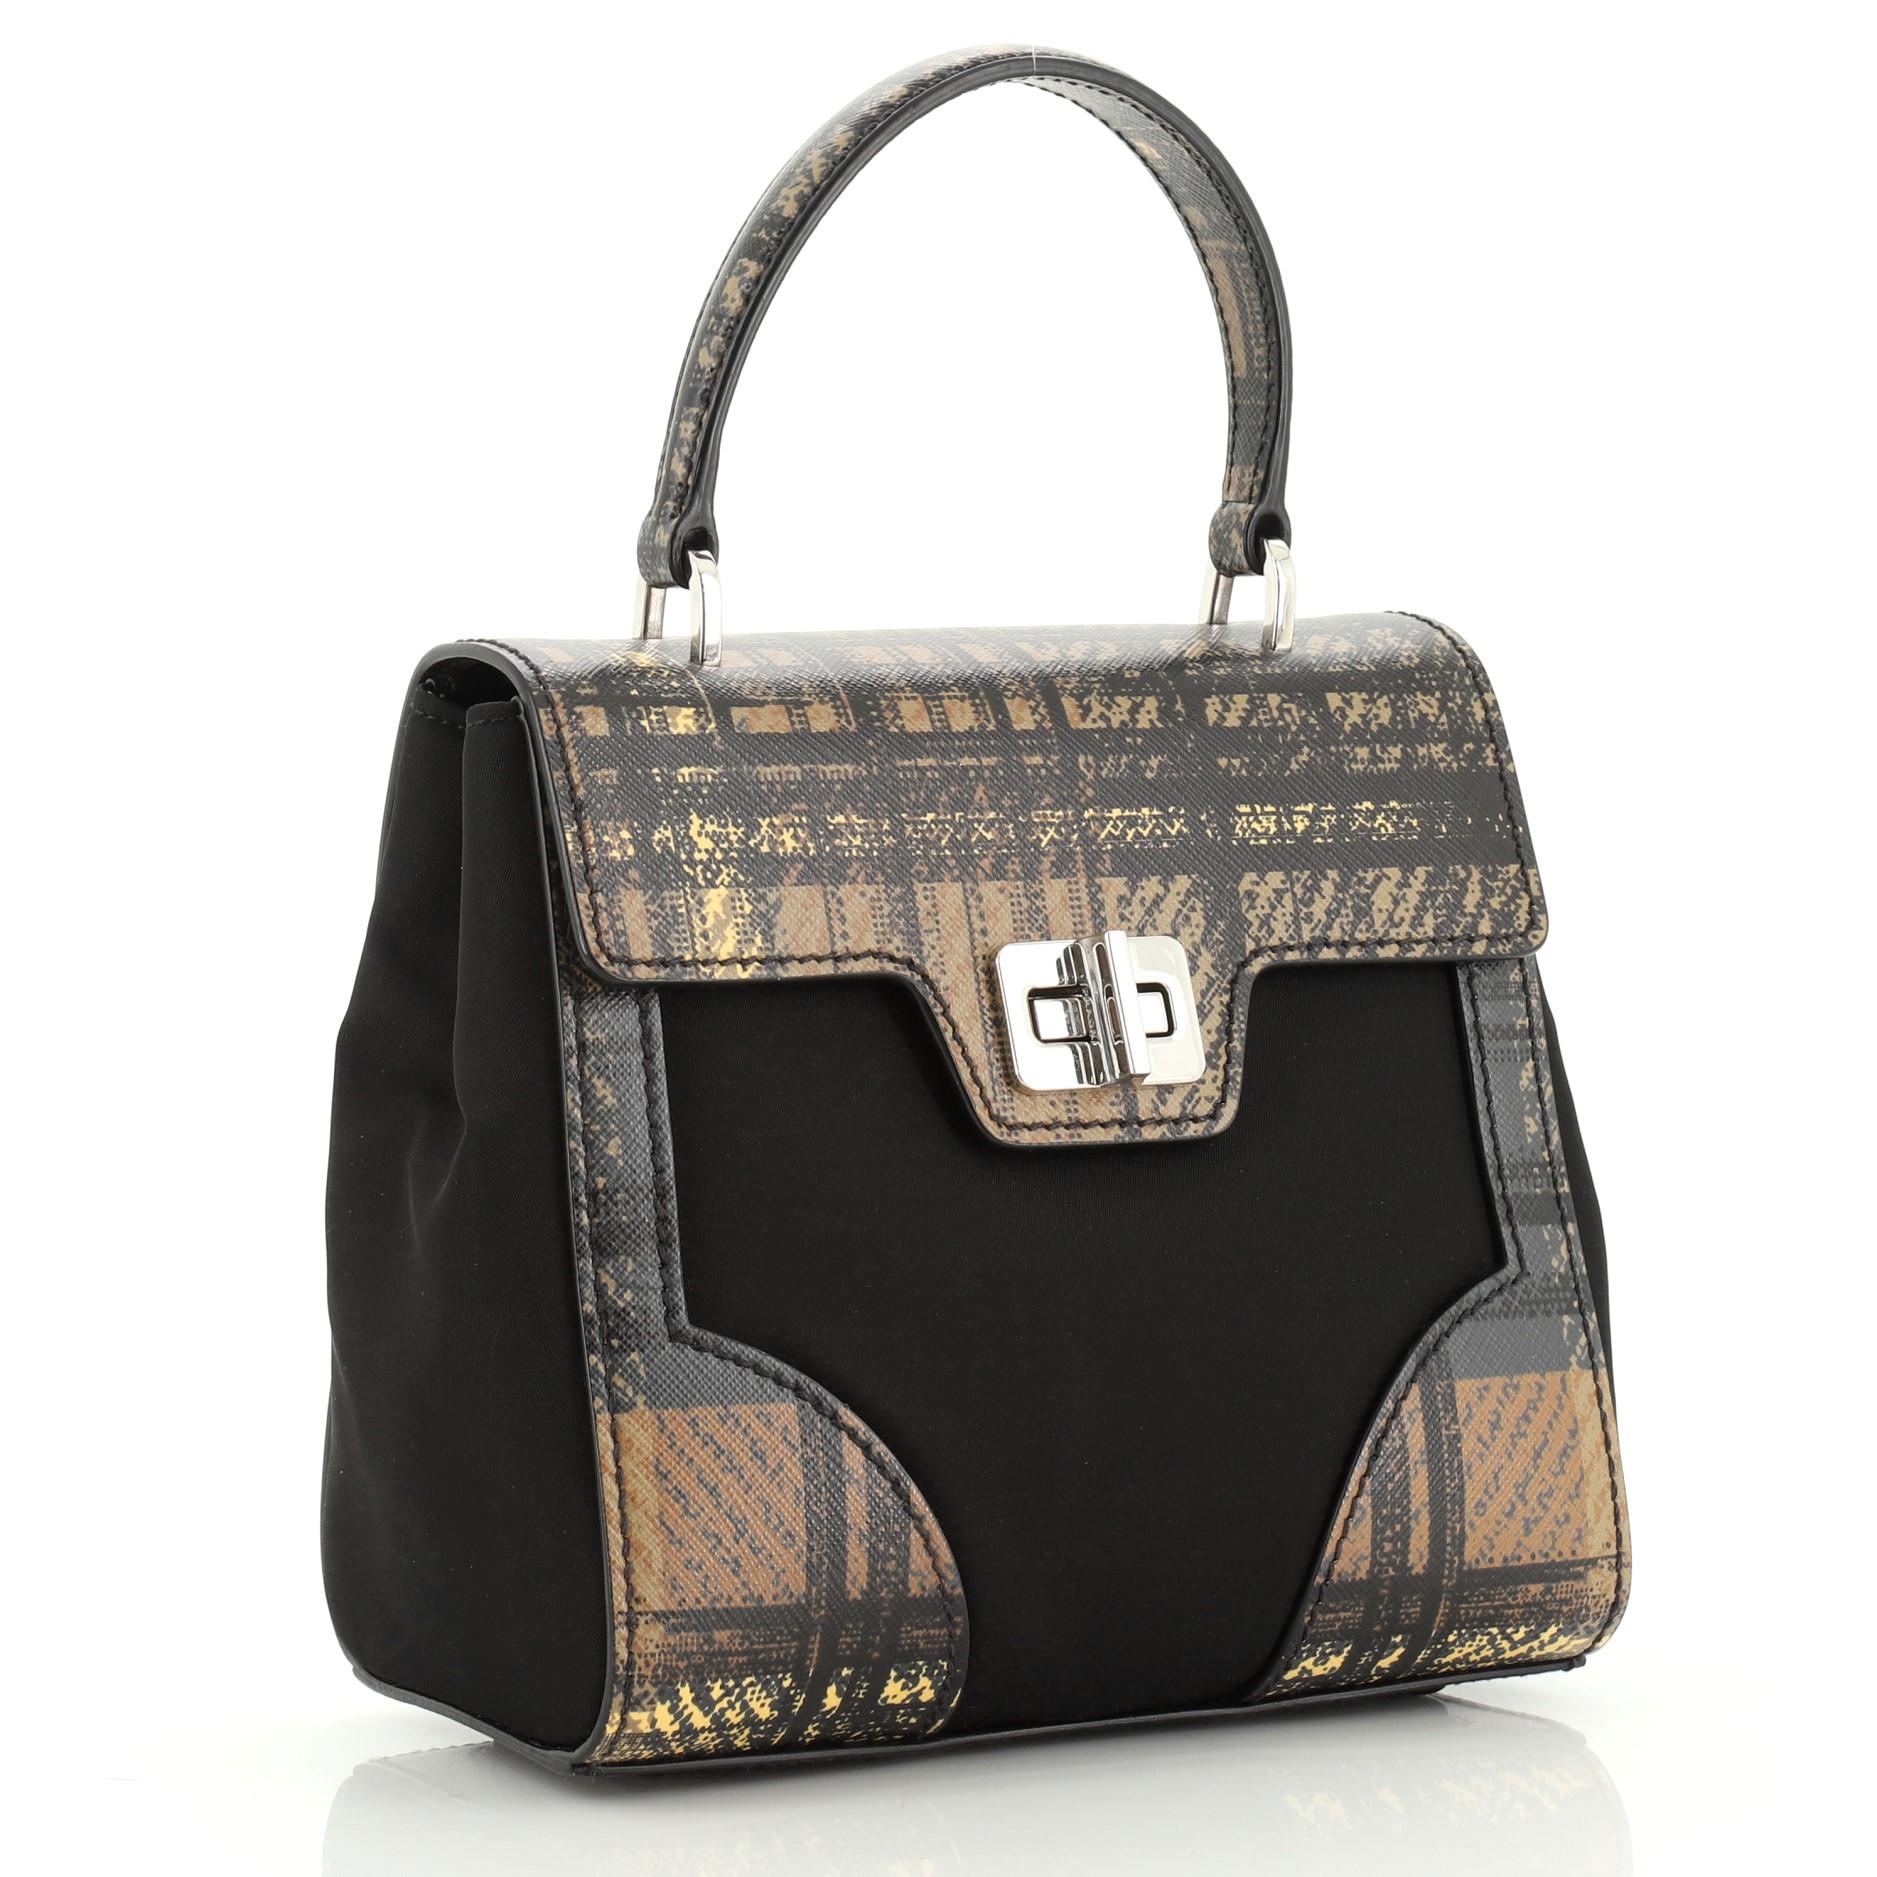 This Prada Turn Lock Top Handle Bag Printed Saffiano Leather with Tessuto Small, crafted from brown printed saffiano leather with black tessuto, features a leather top handle and silver-tone hardware. Its turn lock closure opens to a black fabric